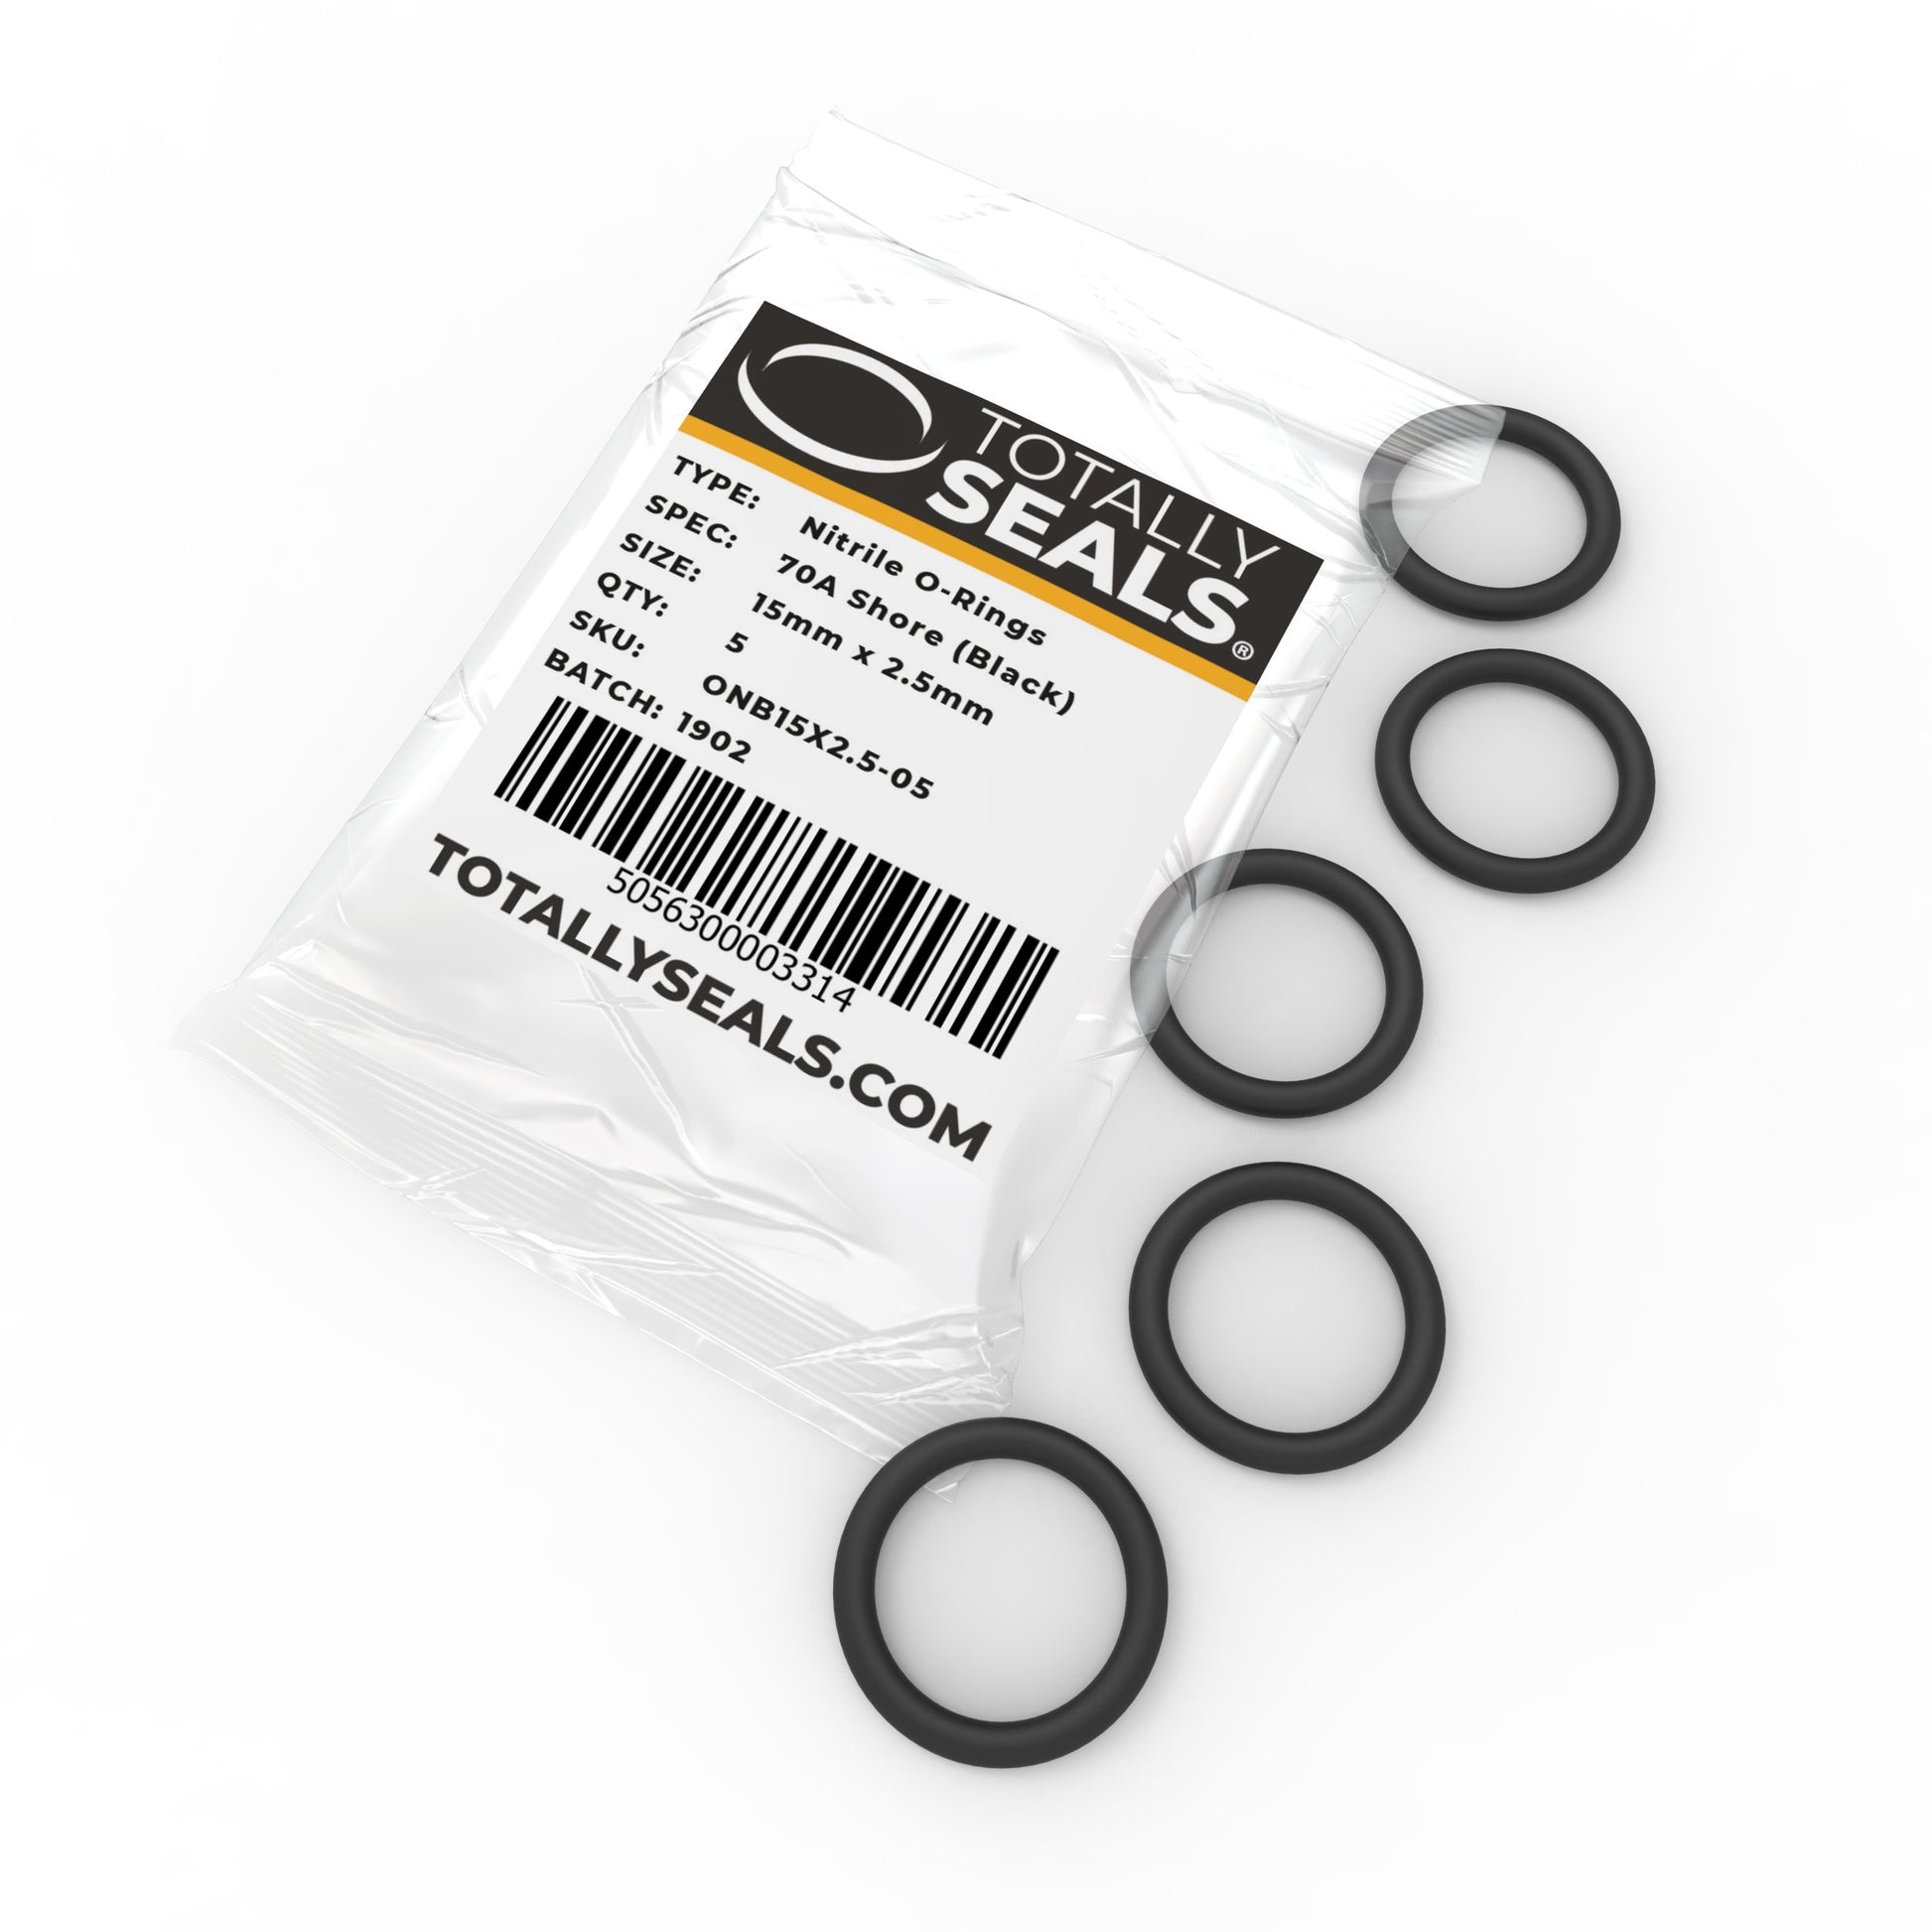 15mm x 2.5mm (20mm OD) Nitrile O-Rings - Totally Seals®